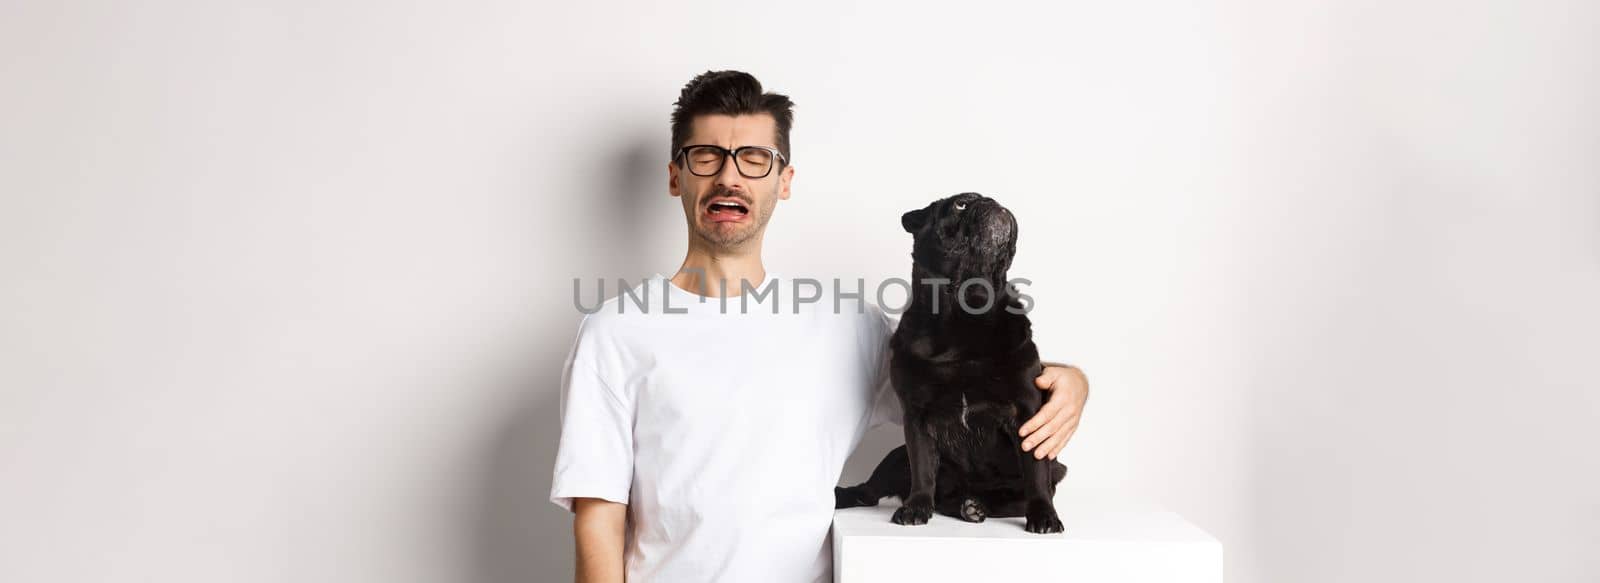 Image of sad crying man hugging his cute black pug, dog looking curious at upper left corner promo logo, standing over white background.